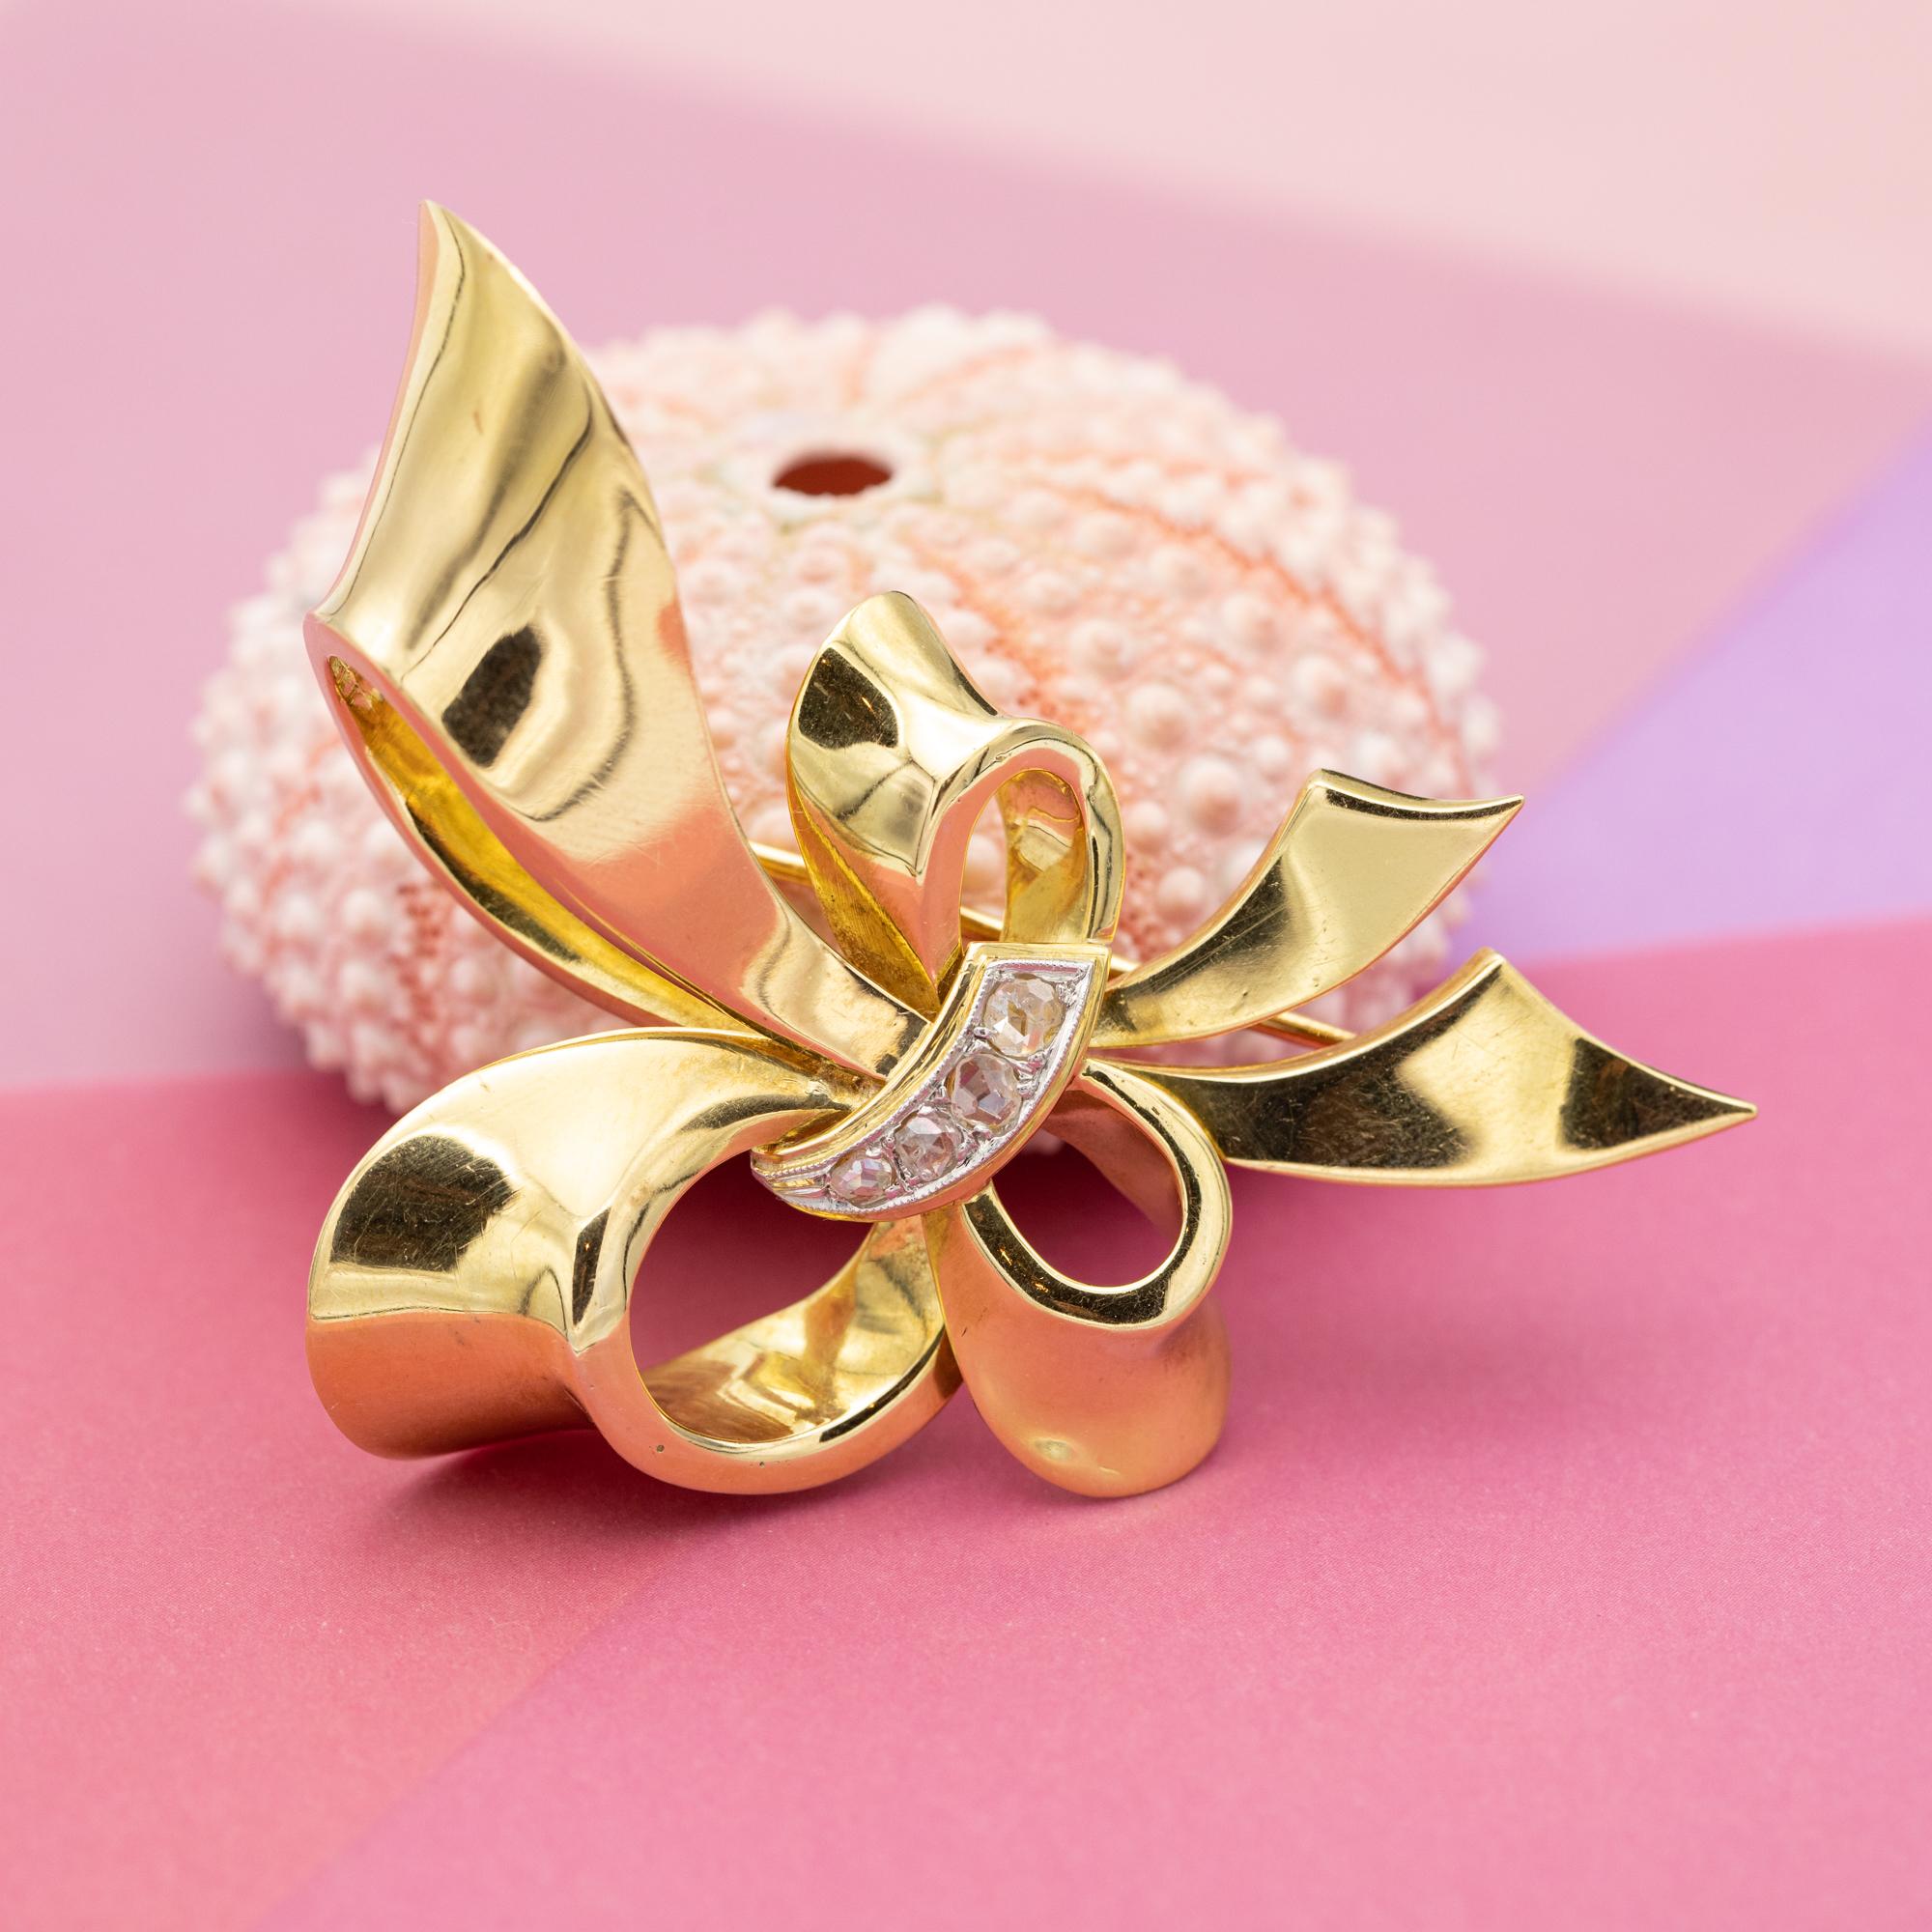 We are happy to introduce you to this lovely work of art from the mid-century, the 1940's, also known as the retro period. This collar brooch is crafted 18 K solid gold and depicts a lovely flowing ribbon forming a marvellous outsized bow. In the